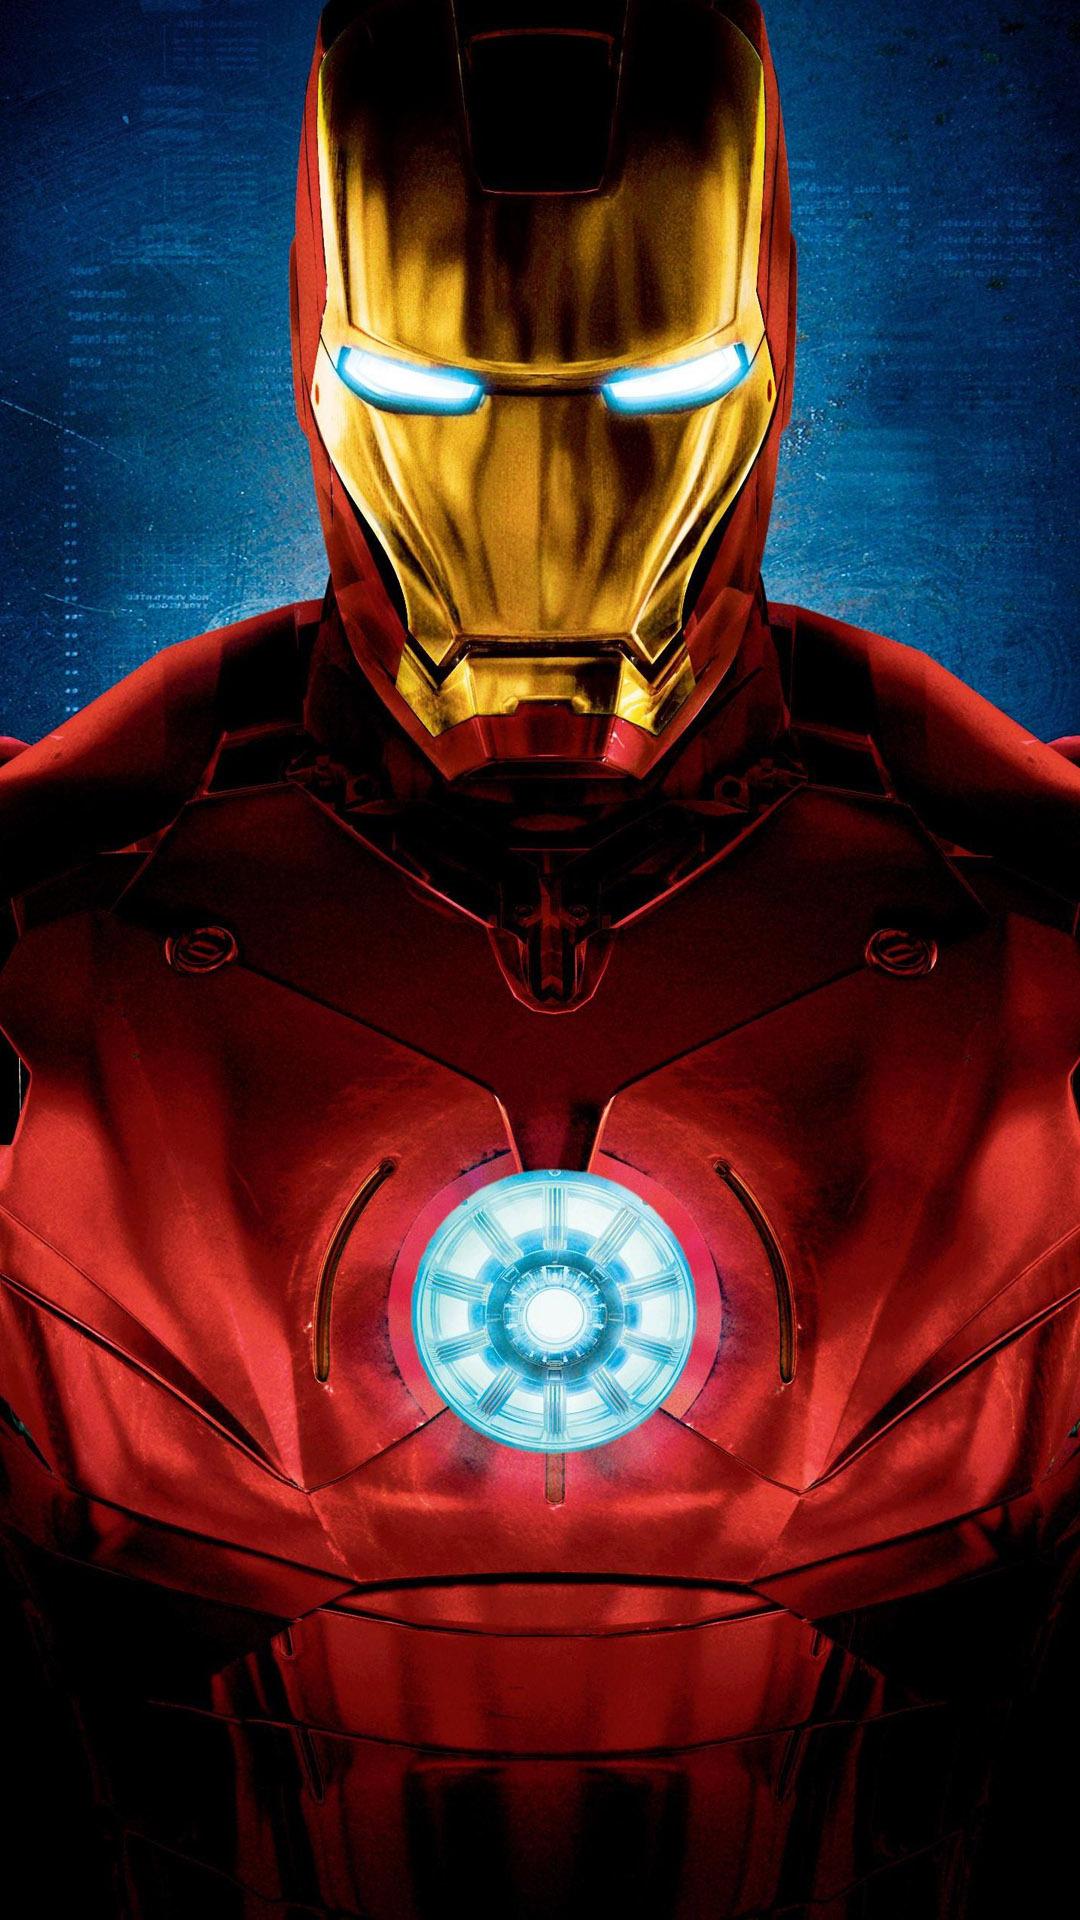 1080 x 1920 · jpeg - Iron man suit - Best HTC One M9 wallpapers free download